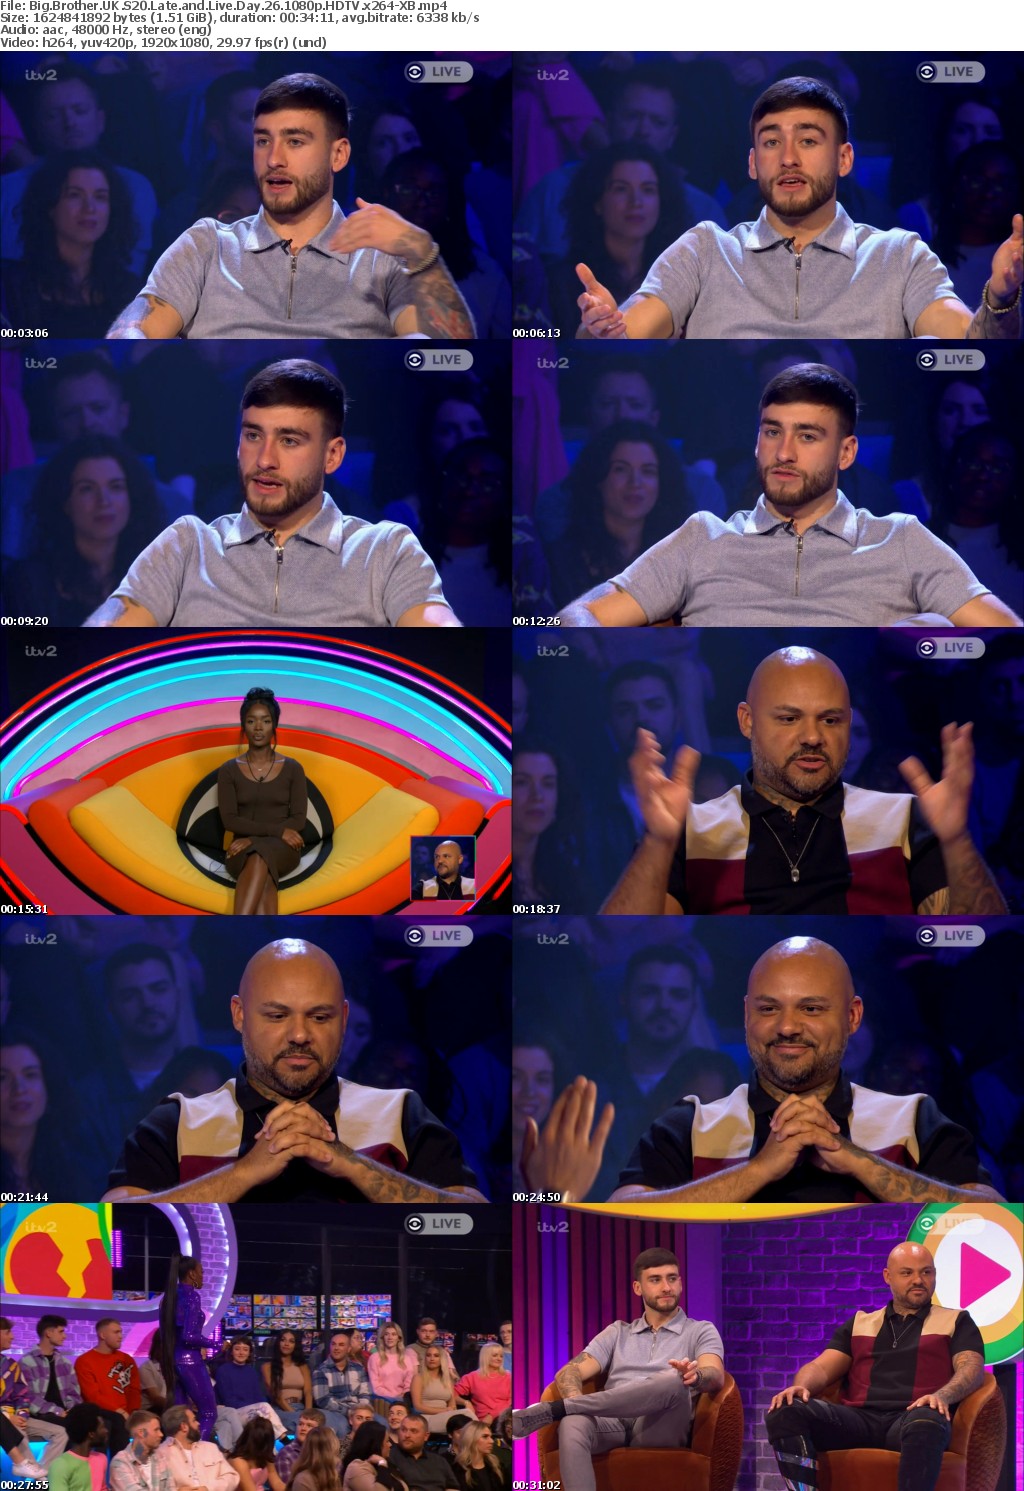 Big Brother UK S20 Late and Live Day 26 1080p HDTV x264-XB